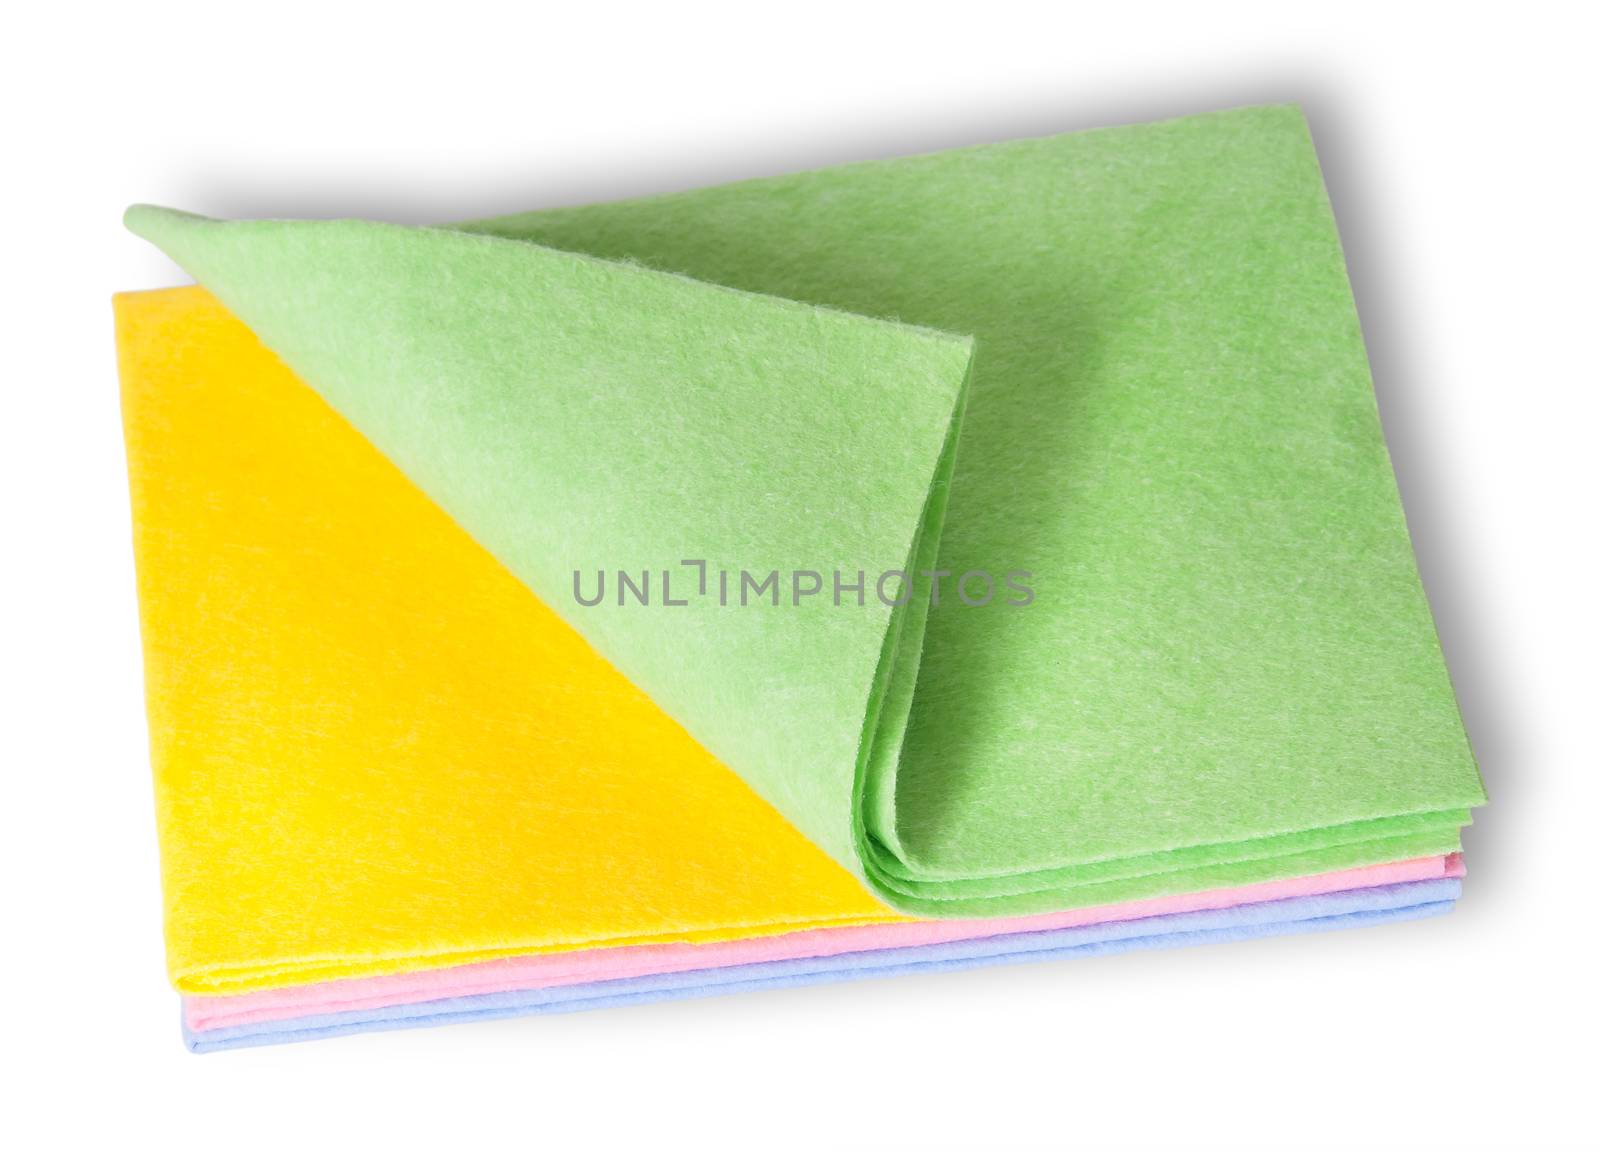 Multicolored cleaning cloths folded on top isolated on white background